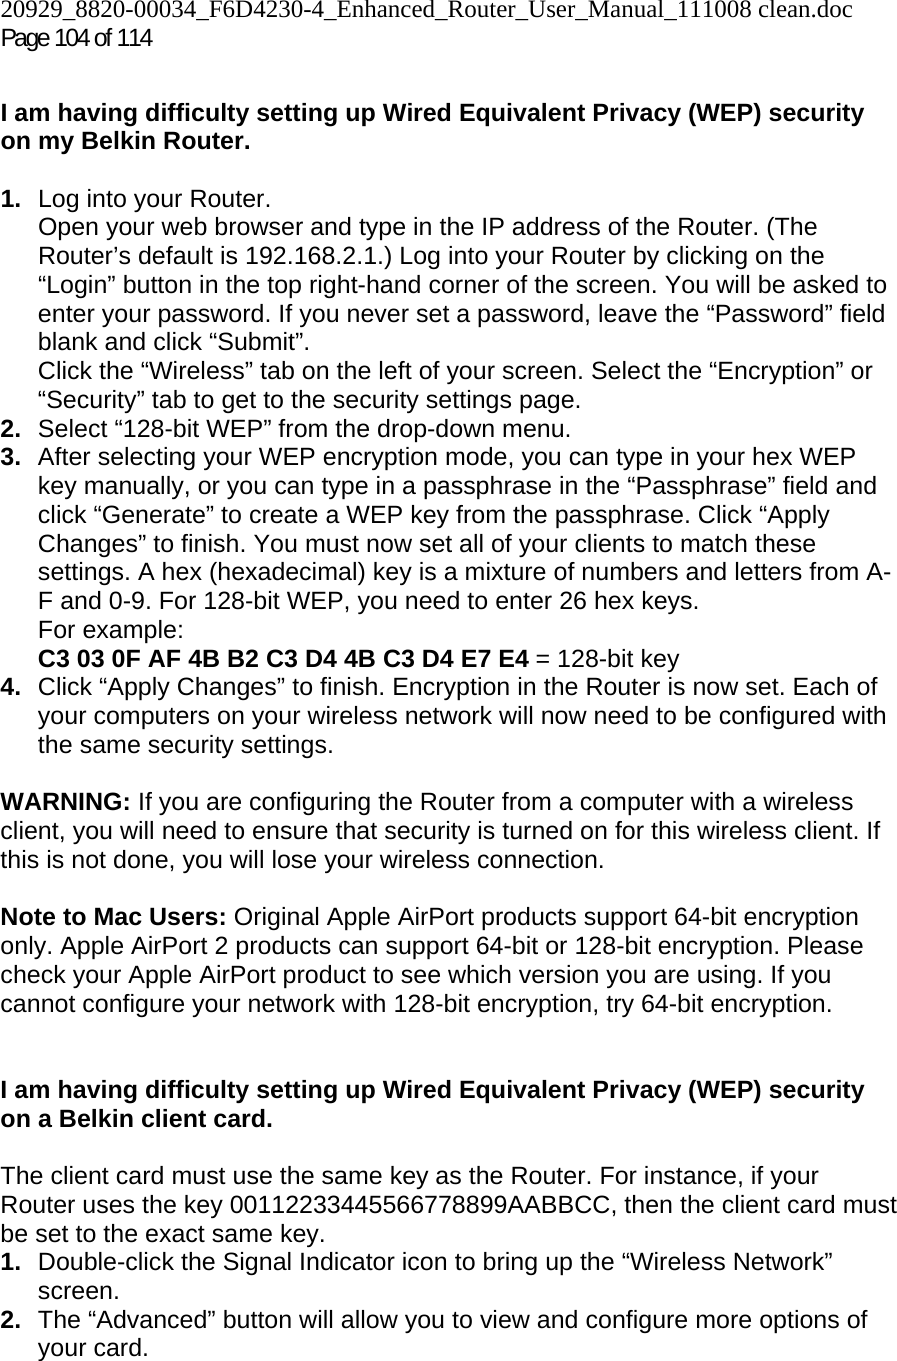 20929_8820-00034_F6D4230-4_Enhanced_Router_User_Manual_111008 clean.doc  Page 104 of 114  I am having difficulty setting up Wired Equivalent Privacy (WEP) security on my Belkin Router.  1.  Log into your Router.  Open your web browser and type in the IP address of the Router. (The Router’s default is 192.168.2.1.) Log into your Router by clicking on the “Login” button in the top right-hand corner of the screen. You will be asked to enter your password. If you never set a password, leave the “Password” field blank and click “Submit”.  Click the “Wireless” tab on the left of your screen. Select the “Encryption” or “Security” tab to get to the security settings page. 2.  Select “128-bit WEP” from the drop-down menu. 3.  After selecting your WEP encryption mode, you can type in your hex WEP key manually, or you can type in a passphrase in the “Passphrase” field and click “Generate” to create a WEP key from the passphrase. Click “Apply Changes” to finish. You must now set all of your clients to match these settings. A hex (hexadecimal) key is a mixture of numbers and letters from A-F and 0-9. For 128-bit WEP, you need to enter 26 hex keys.  For example:  C3 03 0F AF 4B B2 C3 D4 4B C3 D4 E7 E4 = 128-bit key 4.  Click “Apply Changes” to finish. Encryption in the Router is now set. Each of your computers on your wireless network will now need to be configured with the same security settings.   WARNING: If you are configuring the Router from a computer with a wireless client, you will need to ensure that security is turned on for this wireless client. If this is not done, you will lose your wireless connection.  Note to Mac Users: Original Apple AirPort products support 64-bit encryption only. Apple AirPort 2 products can support 64-bit or 128-bit encryption. Please check your Apple AirPort product to see which version you are using. If you cannot configure your network with 128-bit encryption, try 64-bit encryption.    I am having difficulty setting up Wired Equivalent Privacy (WEP) security on a Belkin client card.  The client card must use the same key as the Router. For instance, if your Router uses the key 00112233445566778899AABBCC, then the client card must be set to the exact same key. 1.  Double-click the Signal Indicator icon to bring up the “Wireless Network” screen.  2.  The “Advanced” button will allow you to view and configure more options of your card. 